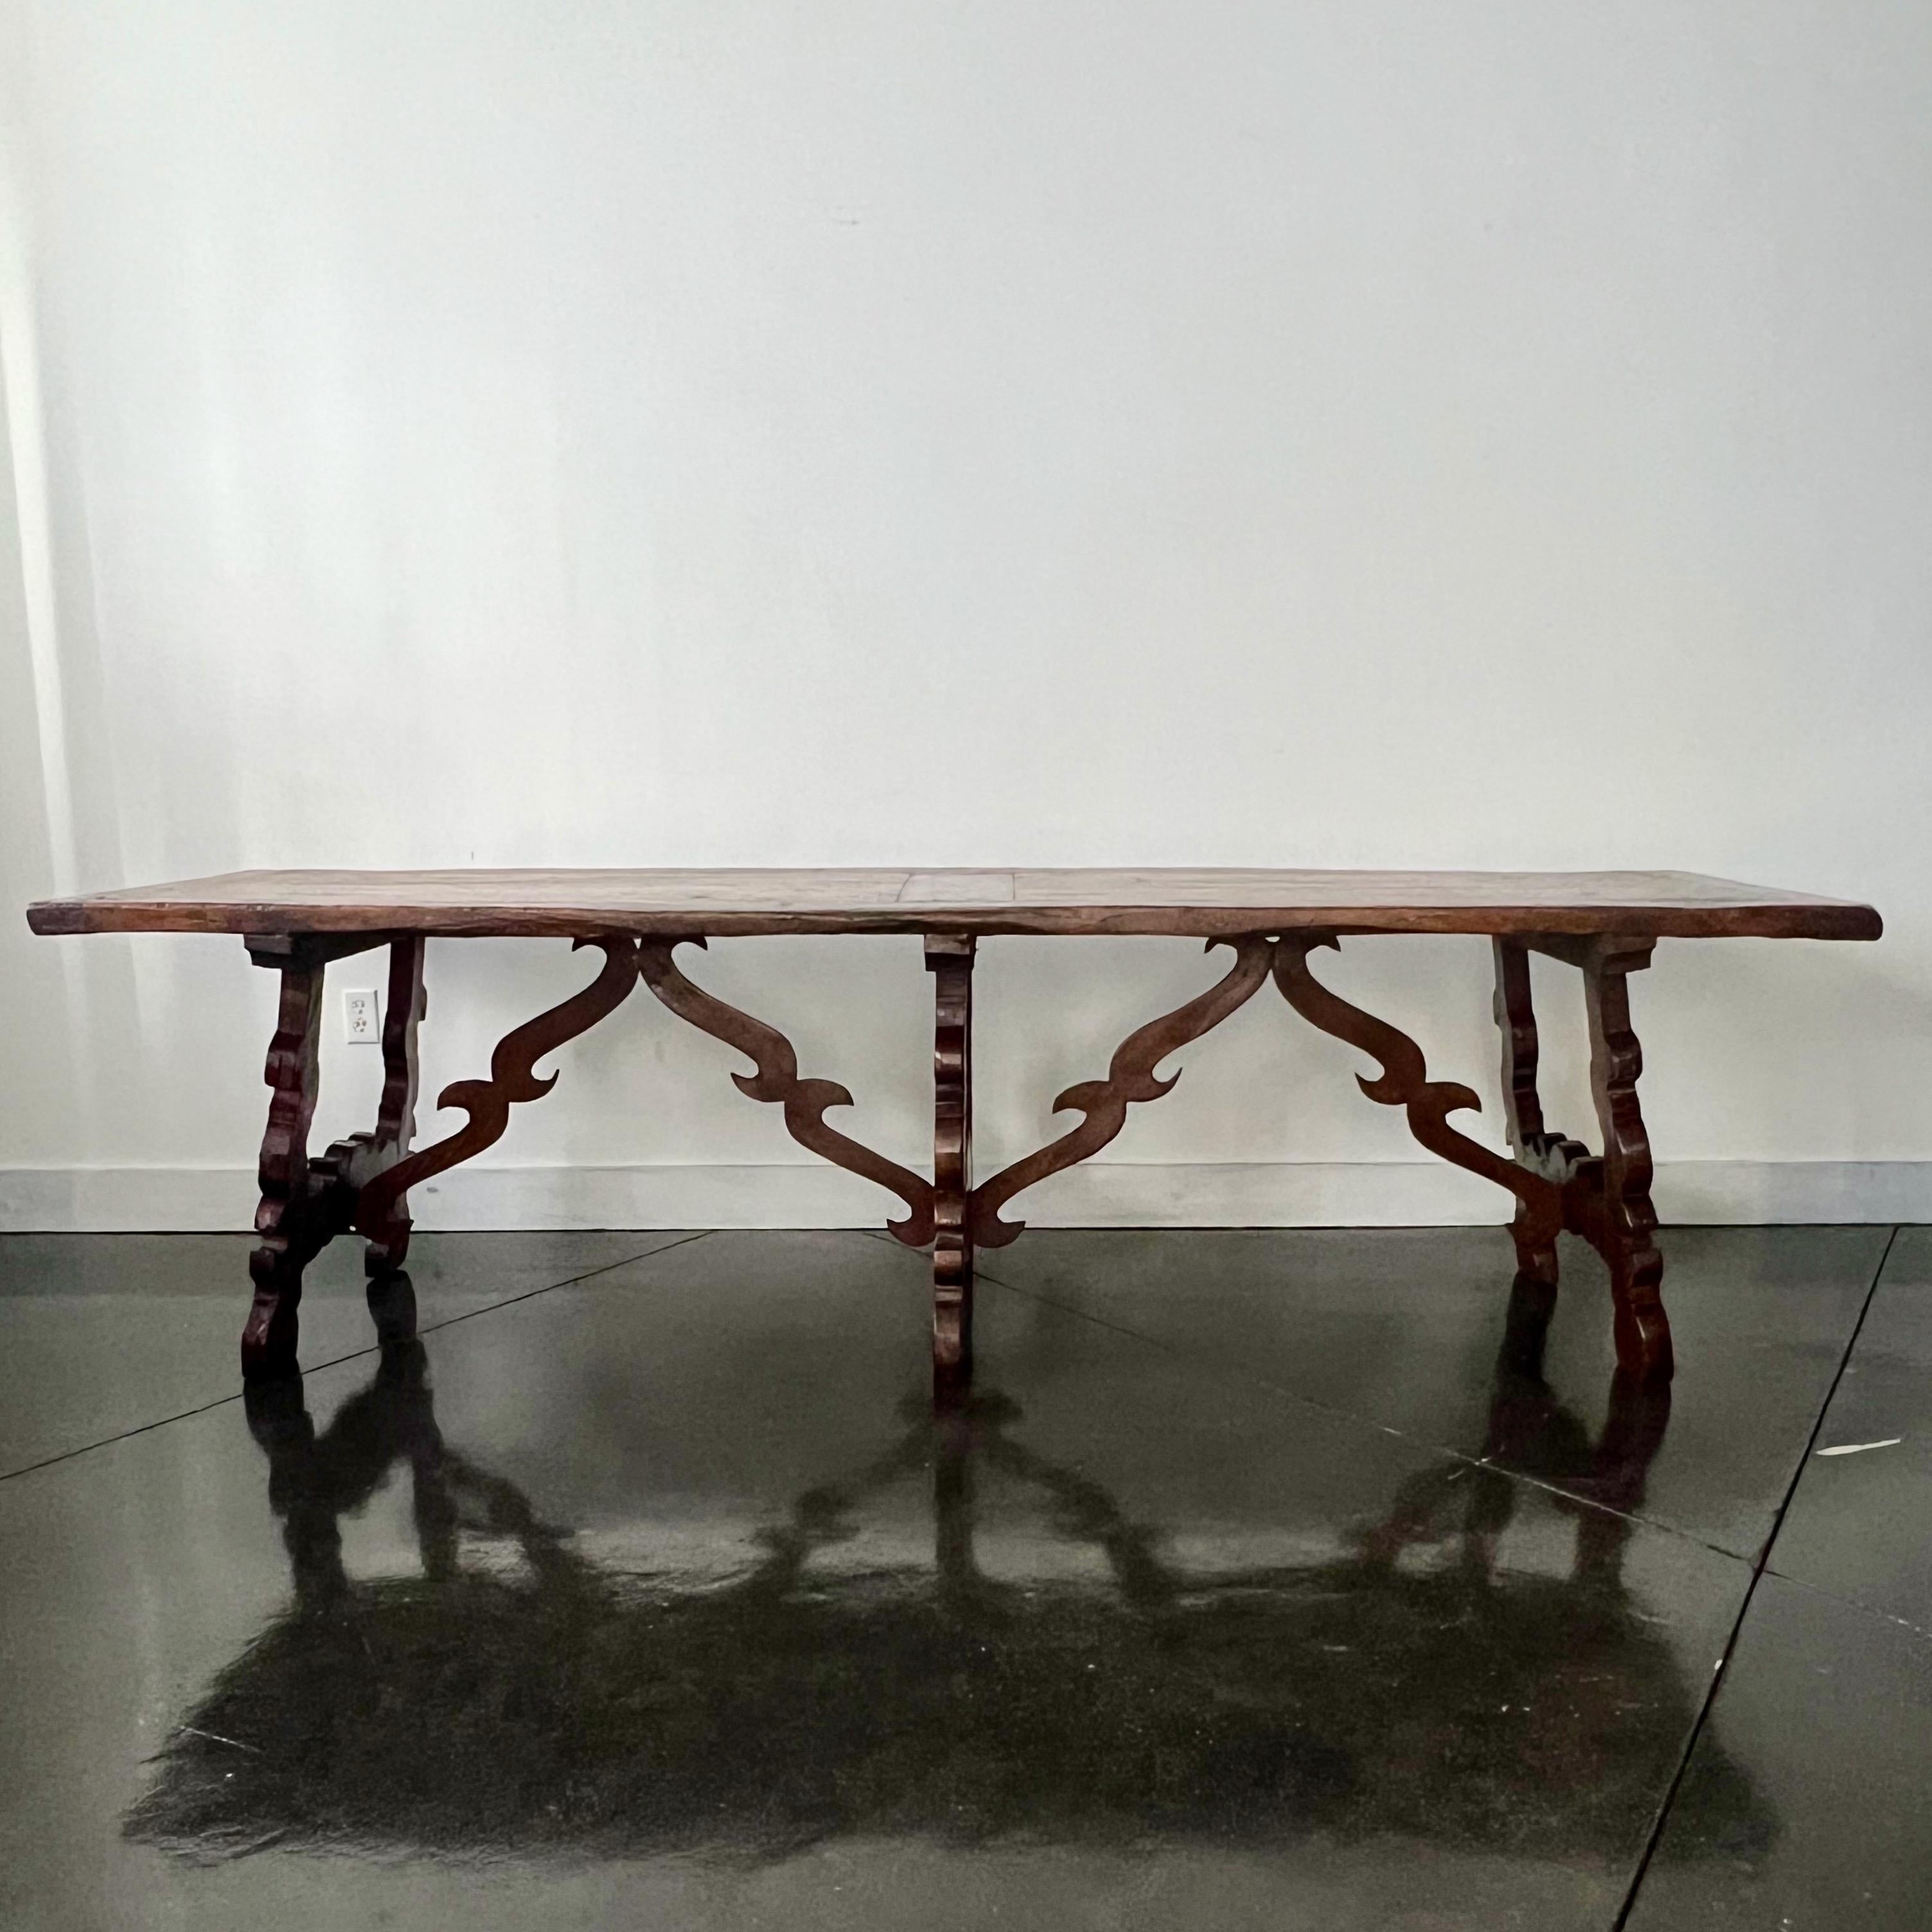 19th century Spanish Baroque style trestle table from Catalan region with framed solid walnut inset board top on three sculpted lyre legs -  joined by carved wood stretchers.
Very solid long table  - seating 10 or more depending size of chairs,